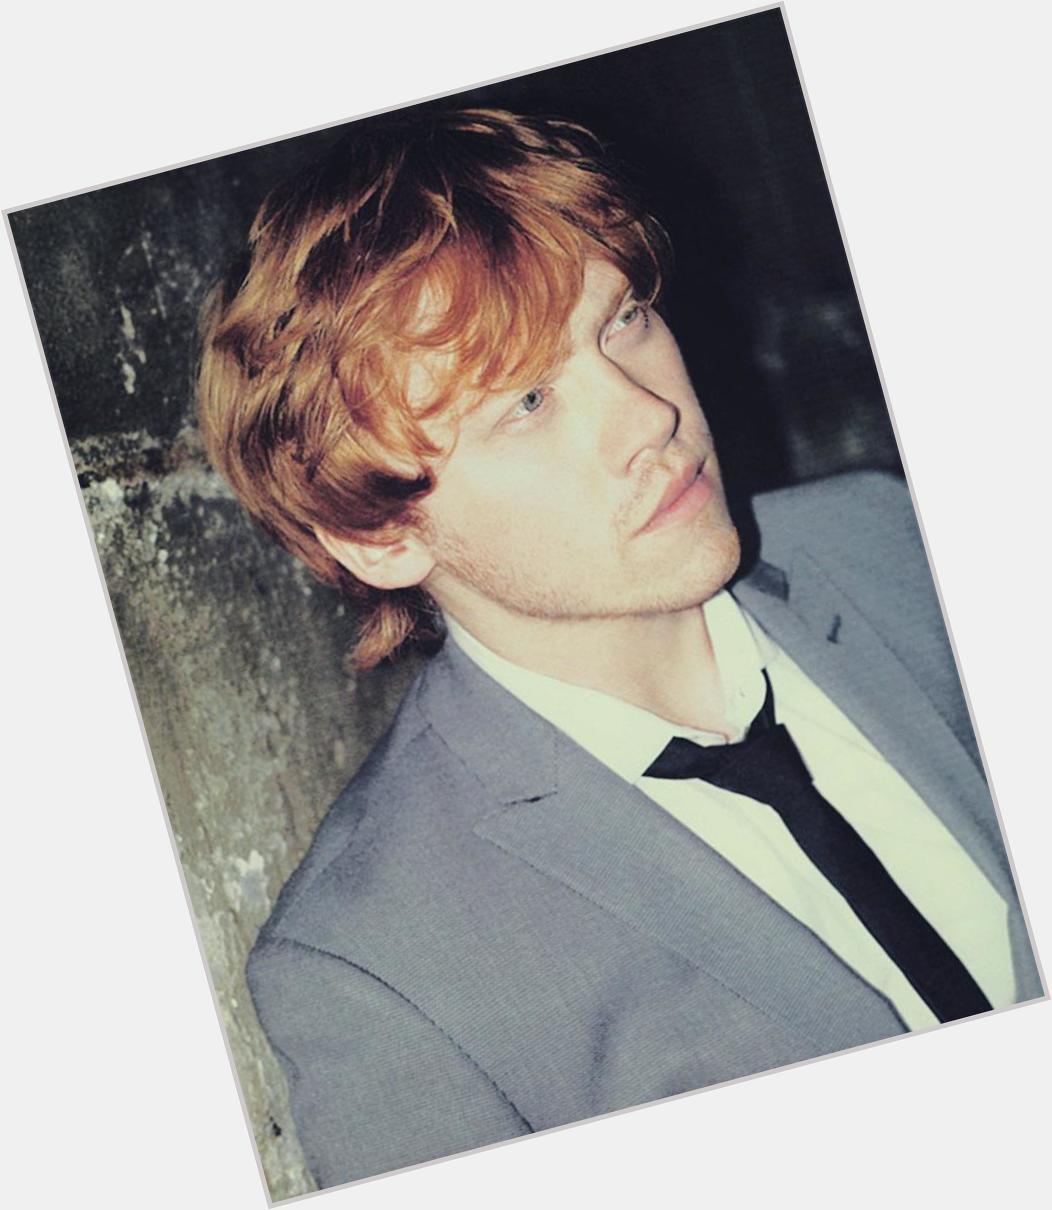 Happy 27th birthday to the loml, Rupert Grint. :\) 